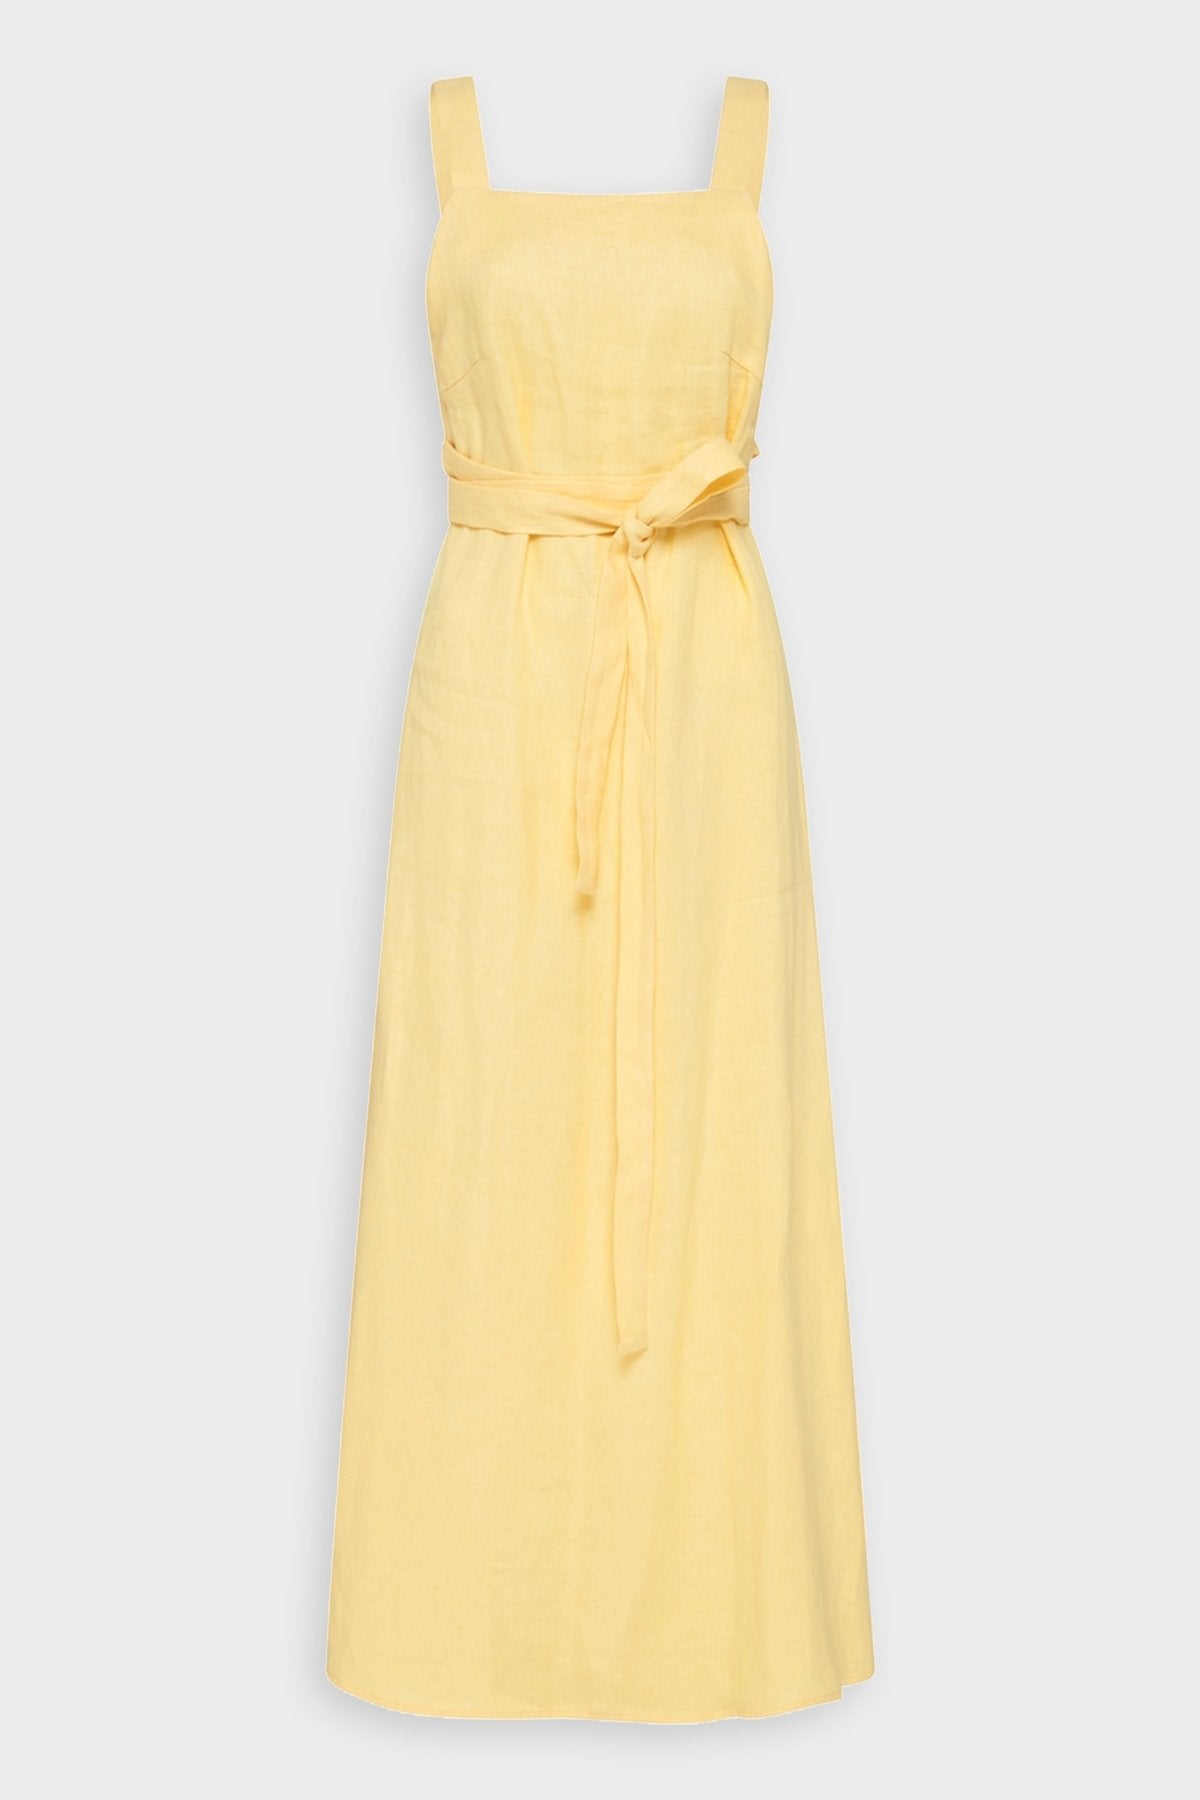 Mustique Dress in Canary - shop-olivia.com